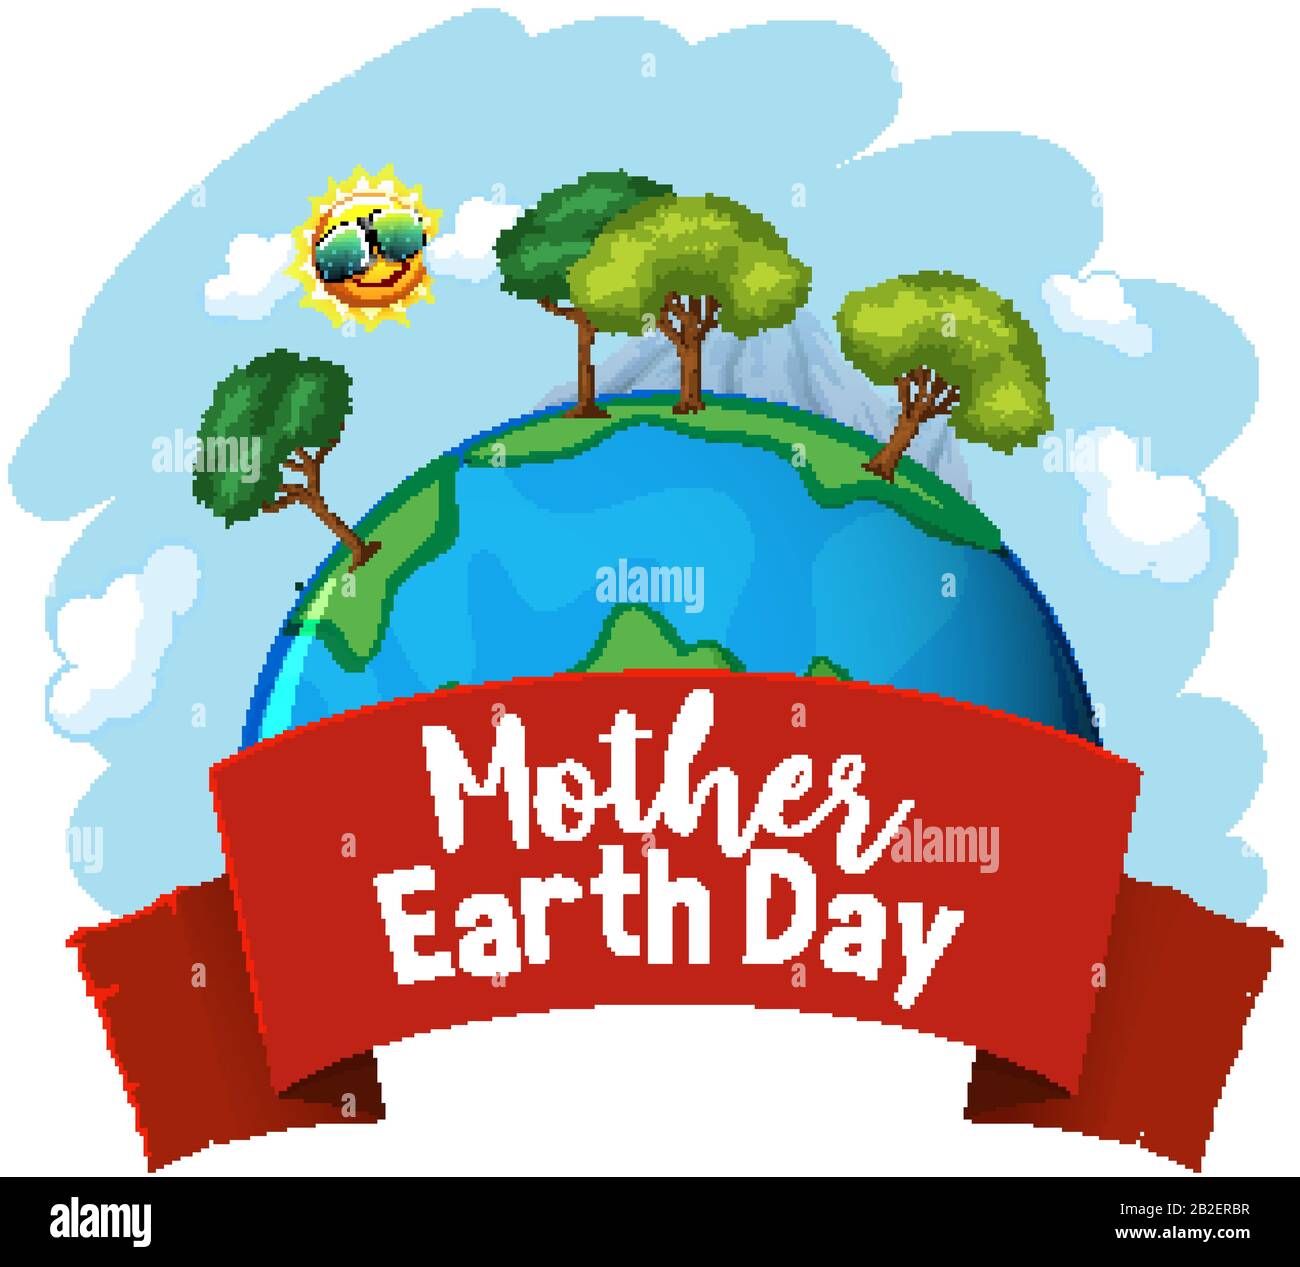 Poster design for mother earth day with many trees on earth illustration Stock Vector